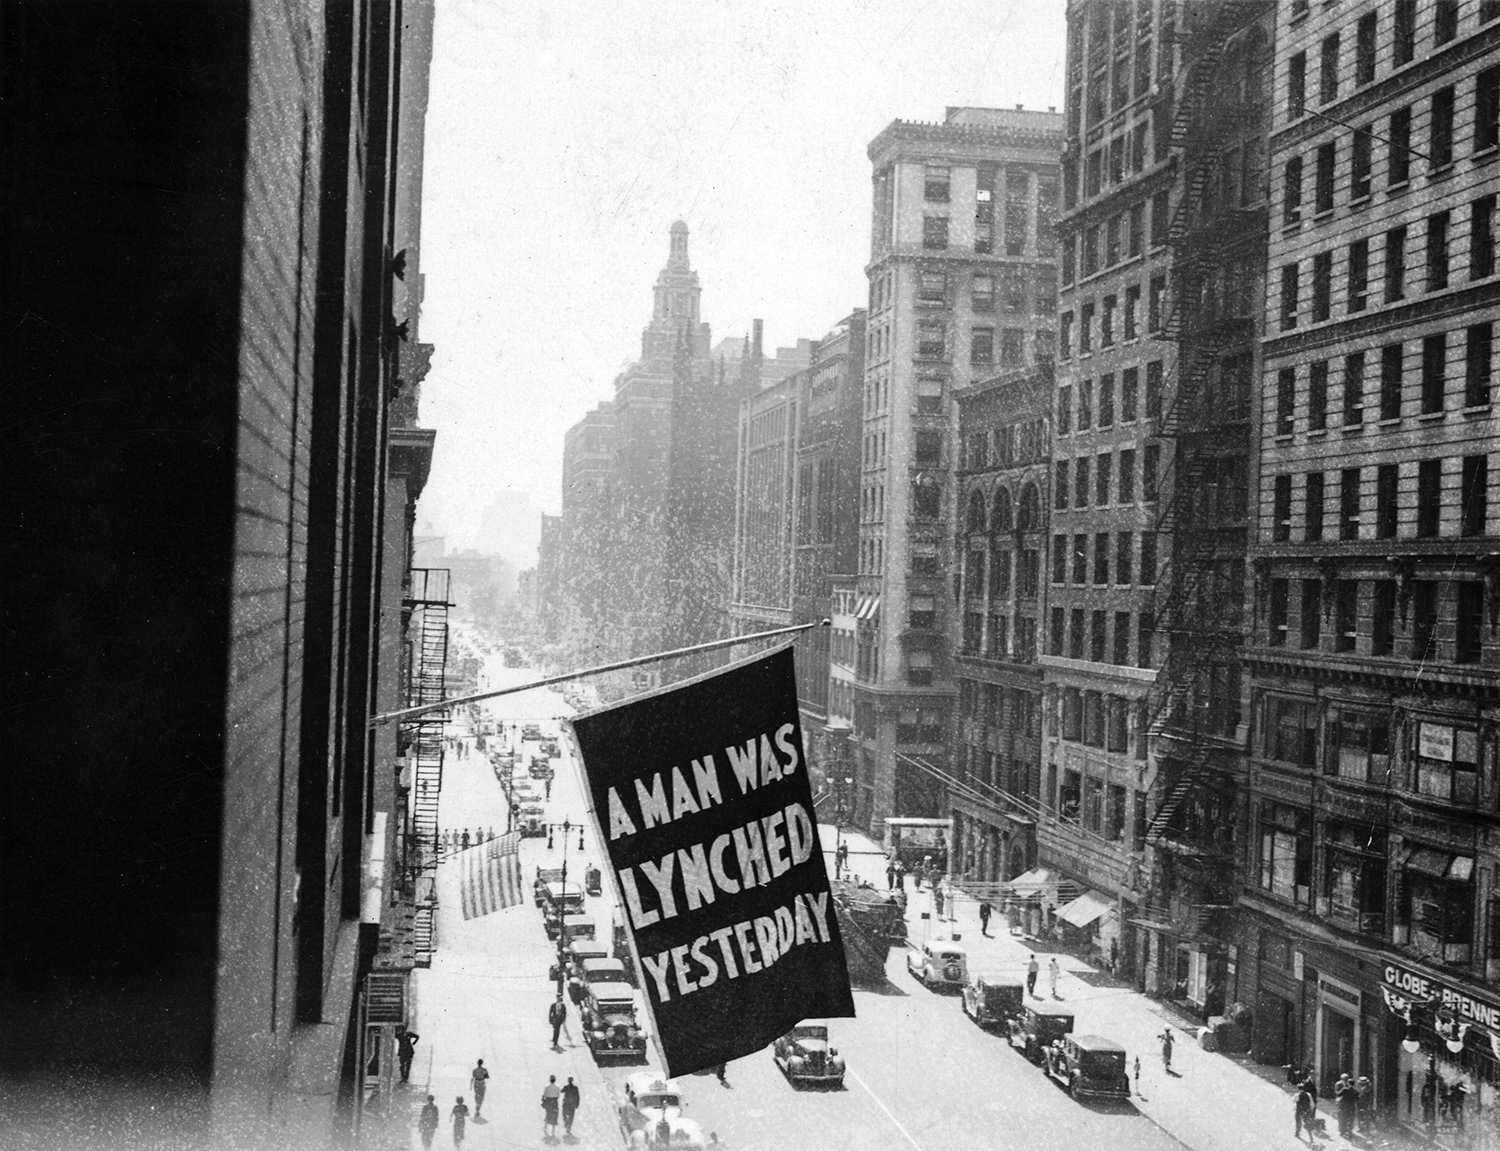 A window flag reading “A man was lynched yesterday” in bold letters in the foreground with a busy New York City street with buildings on either side in the background